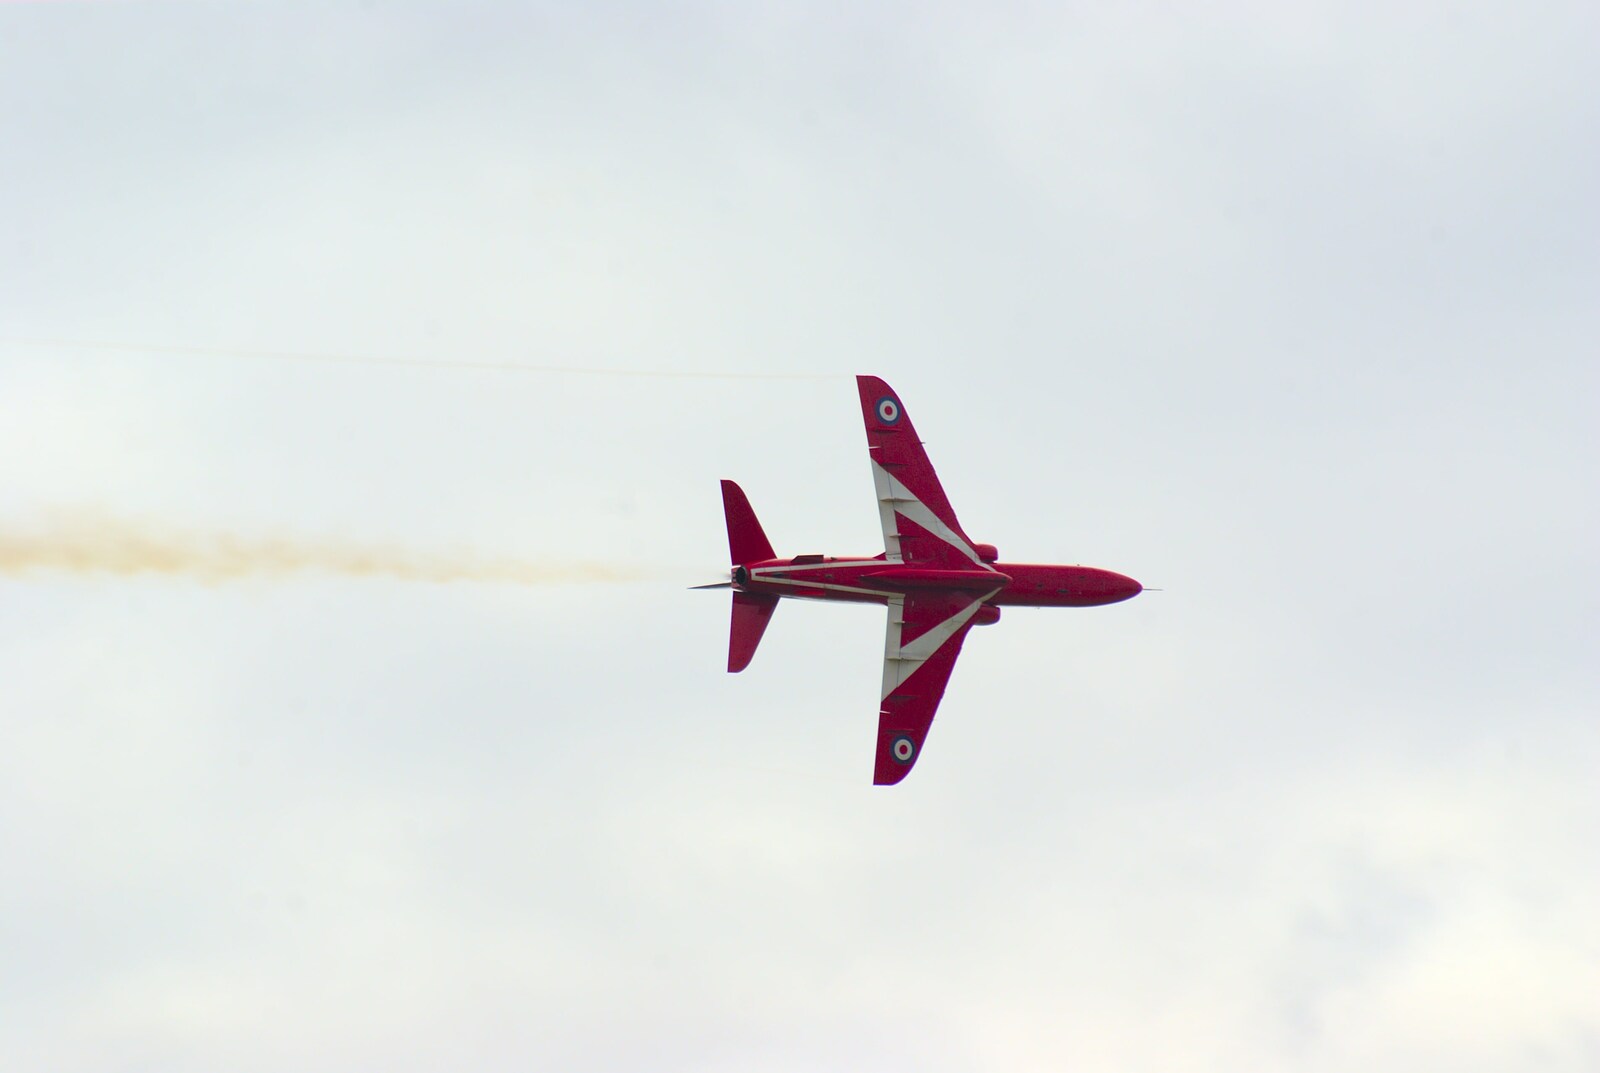 One of the synchro pair streaks past from The Eye Show and the Red Arrows, Palgrave, Suffolk - 31st August 2009